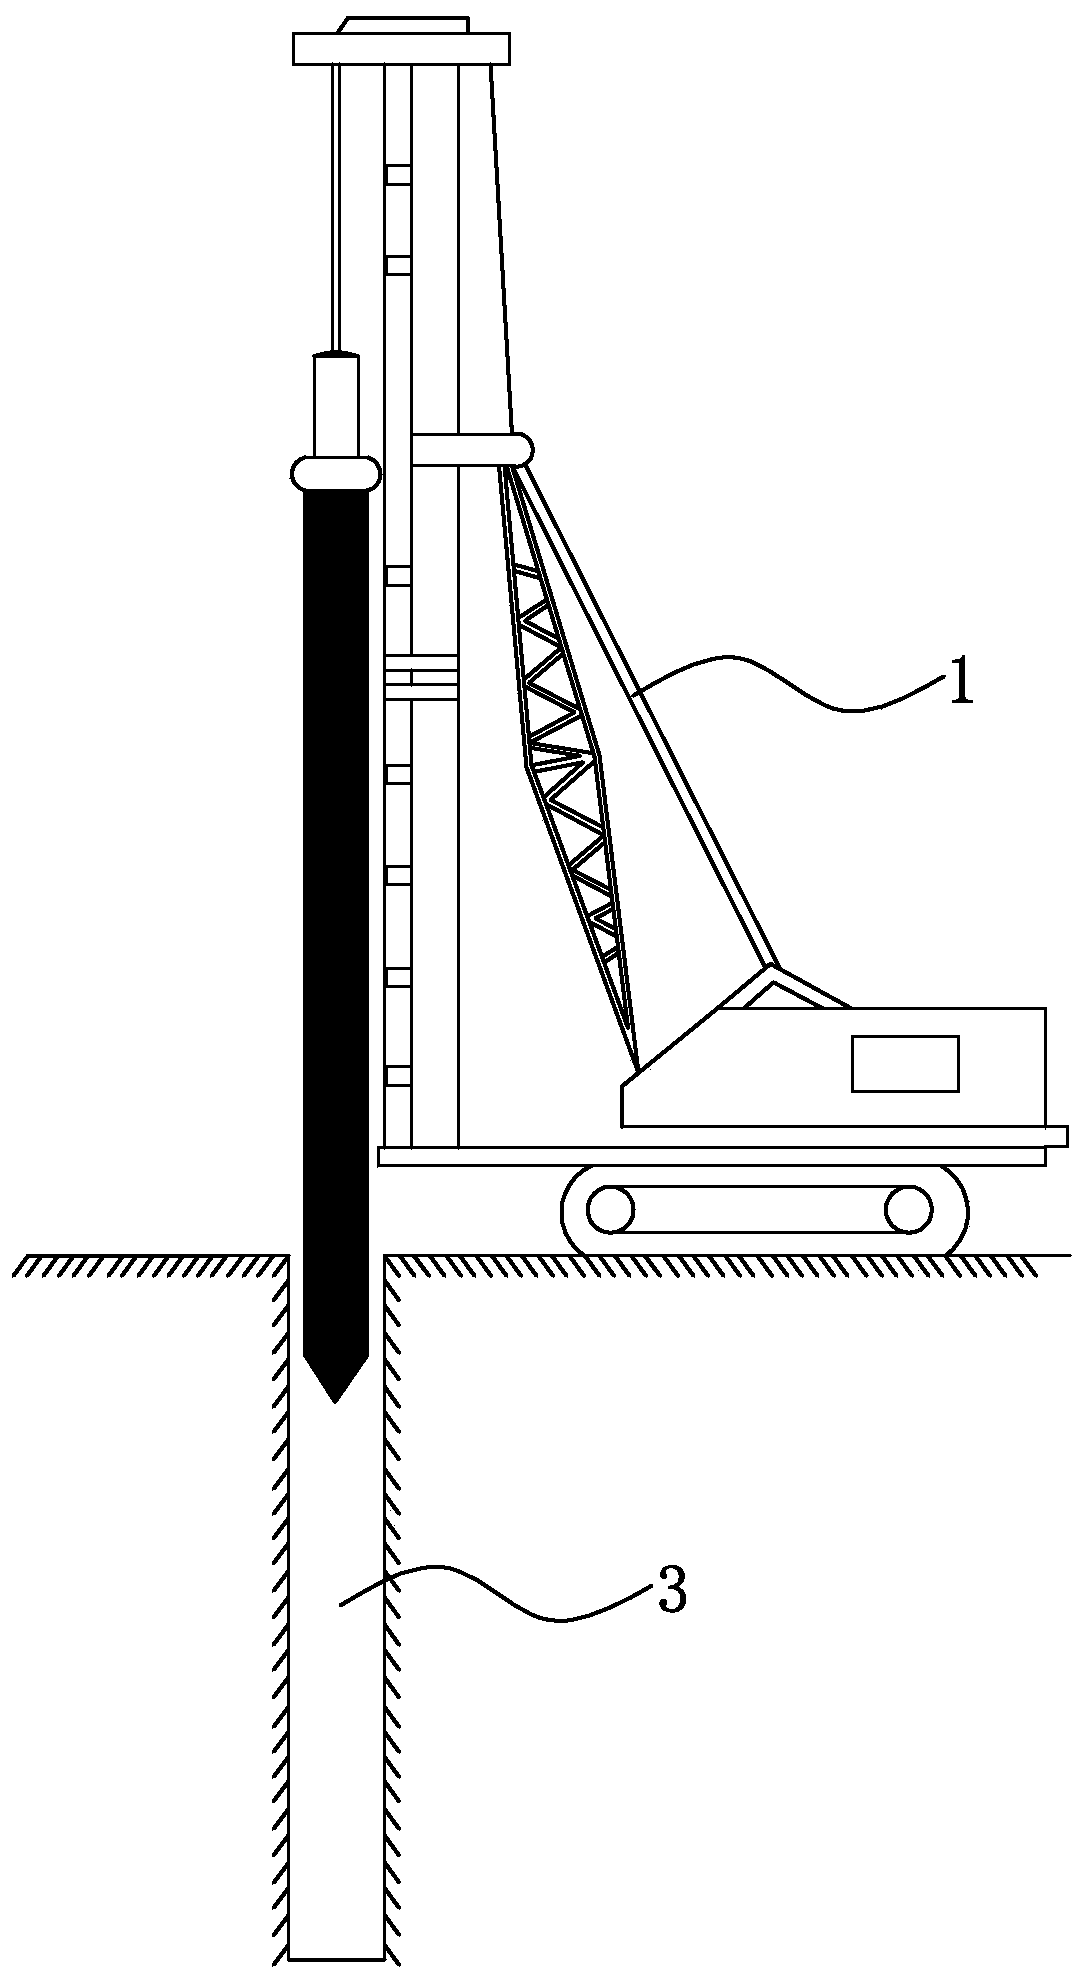 A kind of prefabricated pile construction method